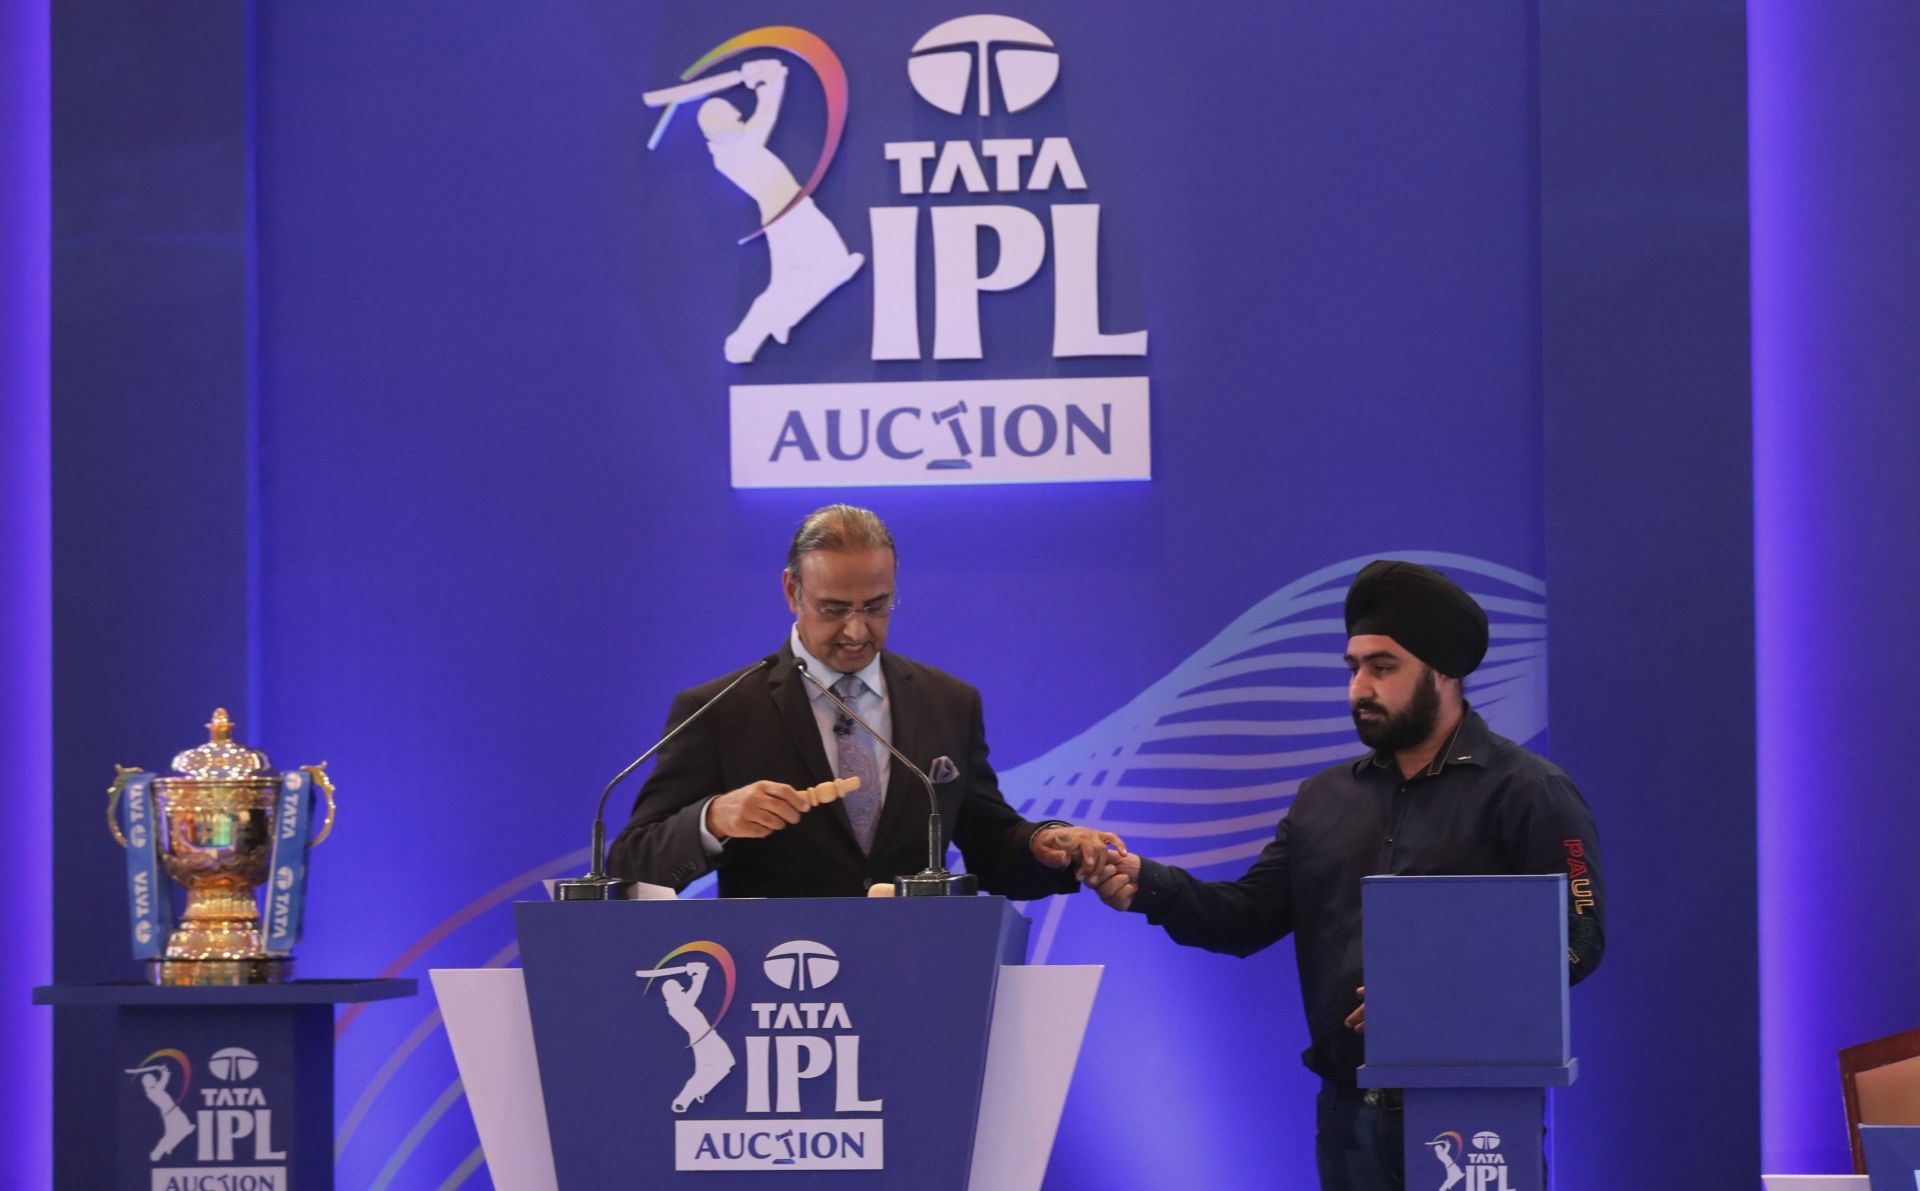 Charu Sharma was prepared to adjust despite the odd, rare limitation in his path at the IPL 2022 Auction (Picture Credits: IPL).